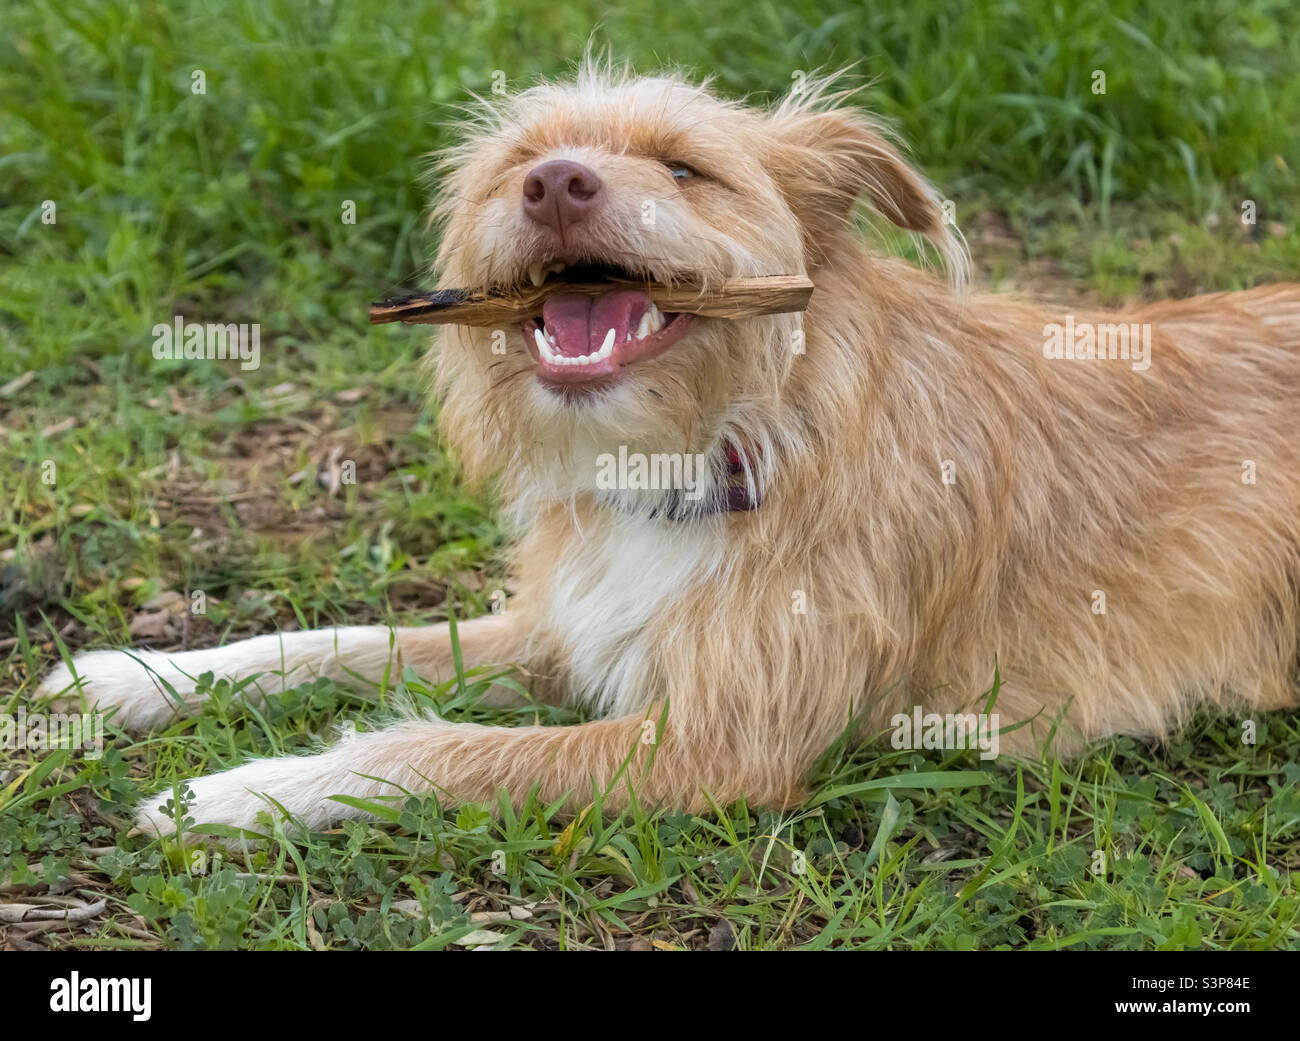 A tan coloured terrier dog sits on grass chewing on a piece of wood Stock Photo